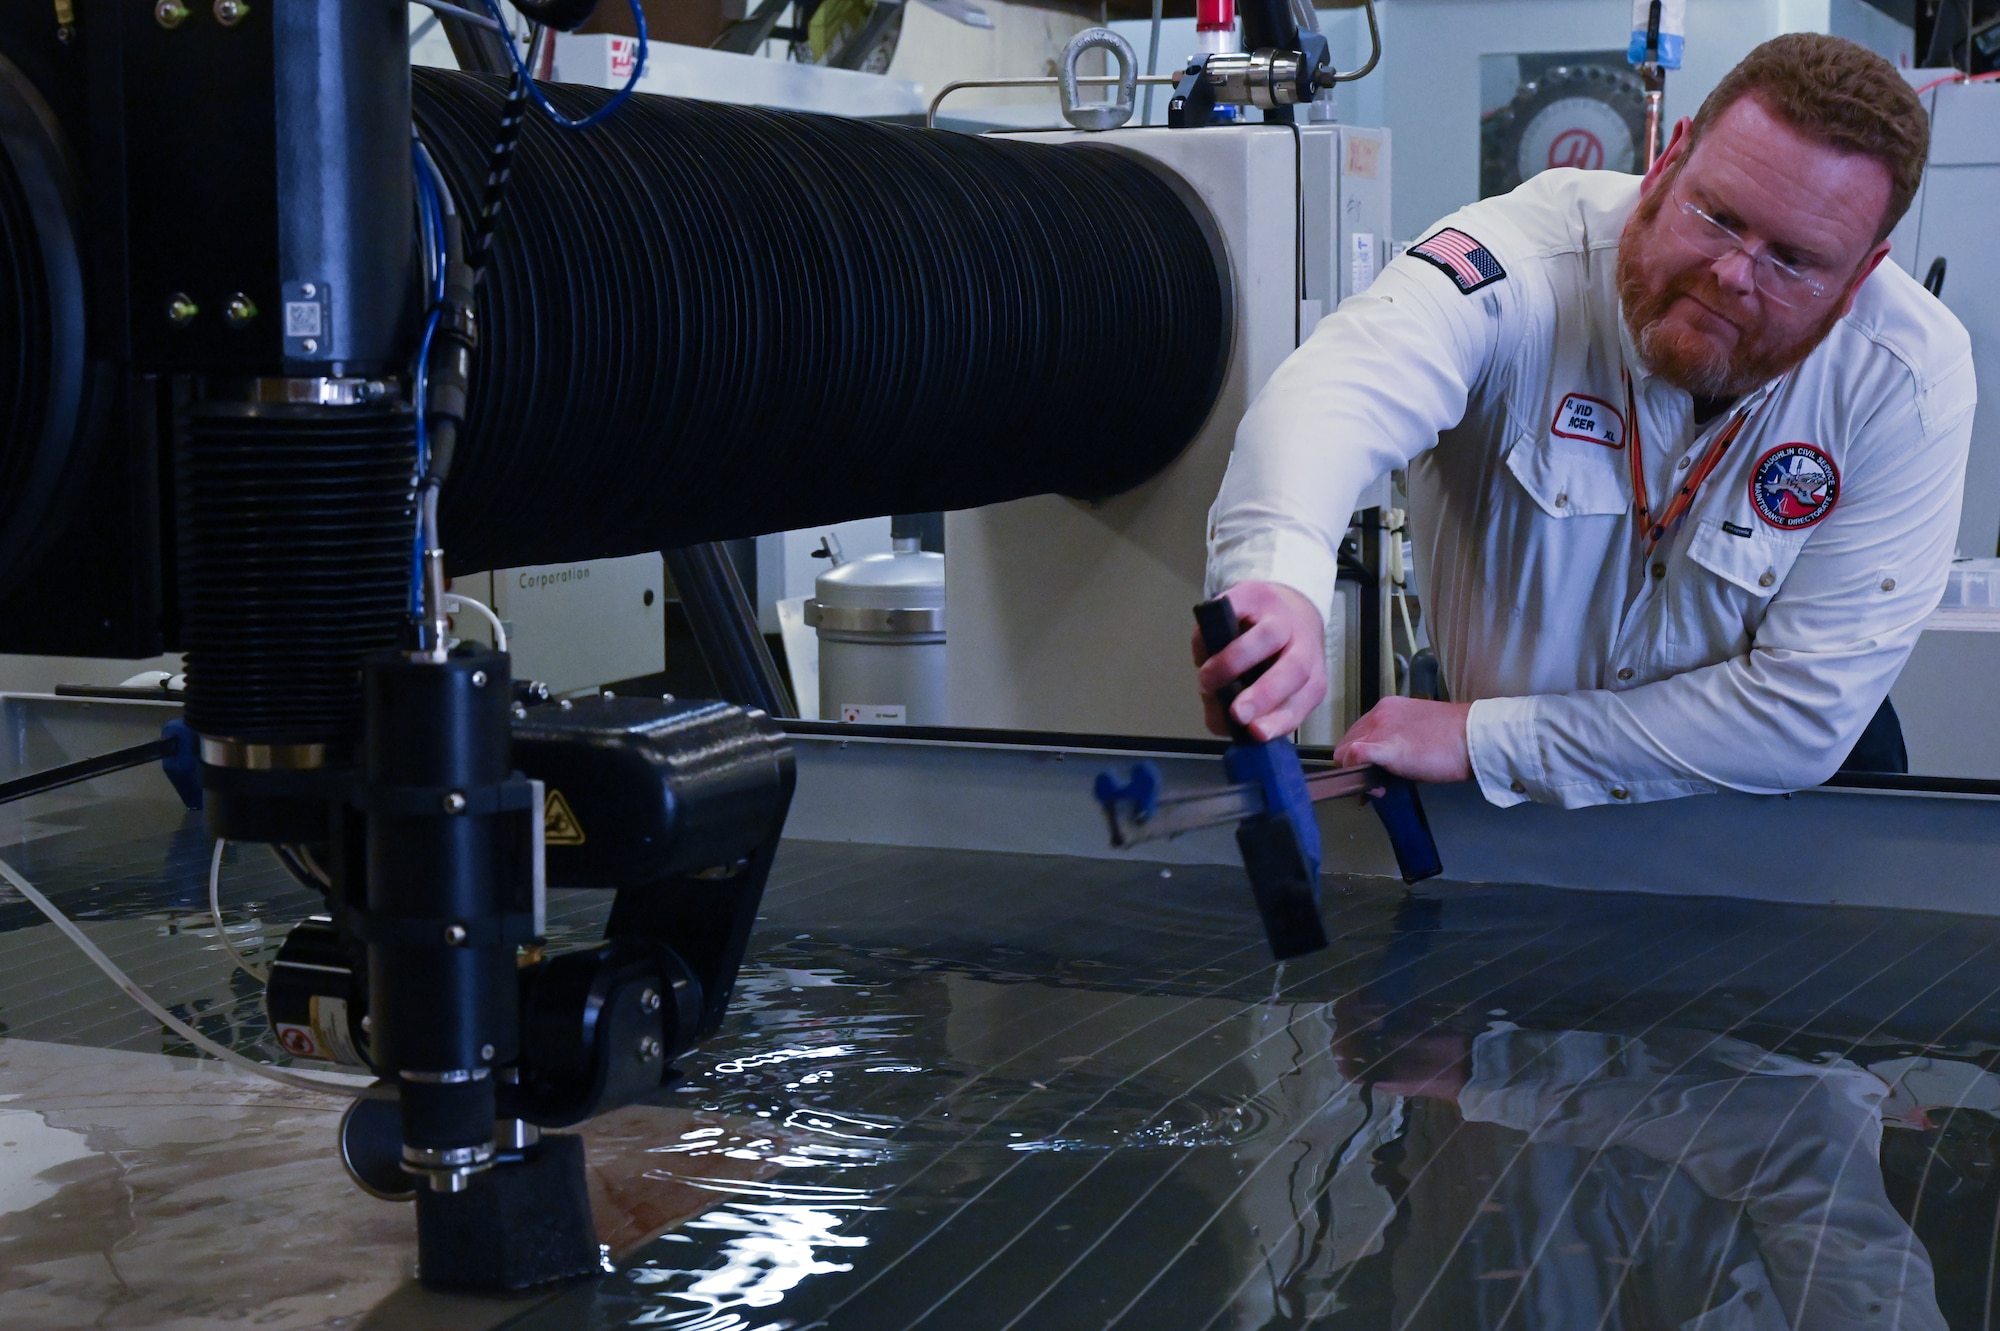 David Mercer, 47th Flying Training Wing fabrication supervisor, removes the extension utility handle at Laughlin Air Force Base, Texas, on April 26, 2022. The water jet ensures no heat-affected zones or mechanical stress on the material. (U.S. Air Force photo by Airman 1st Class Keira Rossman)